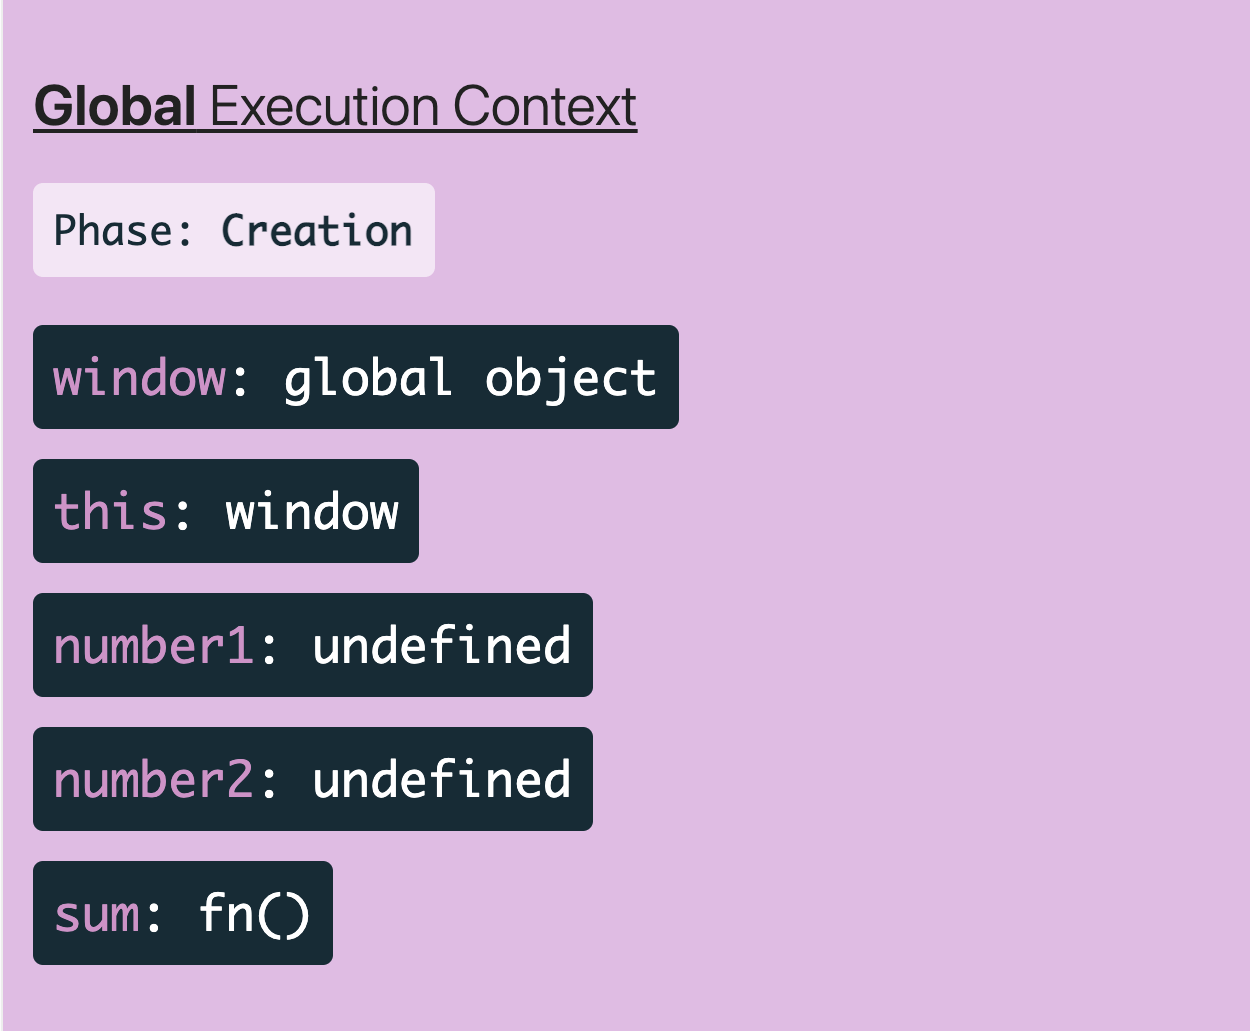 Global execution context. Phase: Creation. window: global object. this: window. number1: undefined. number2: undefined. sum: fn().